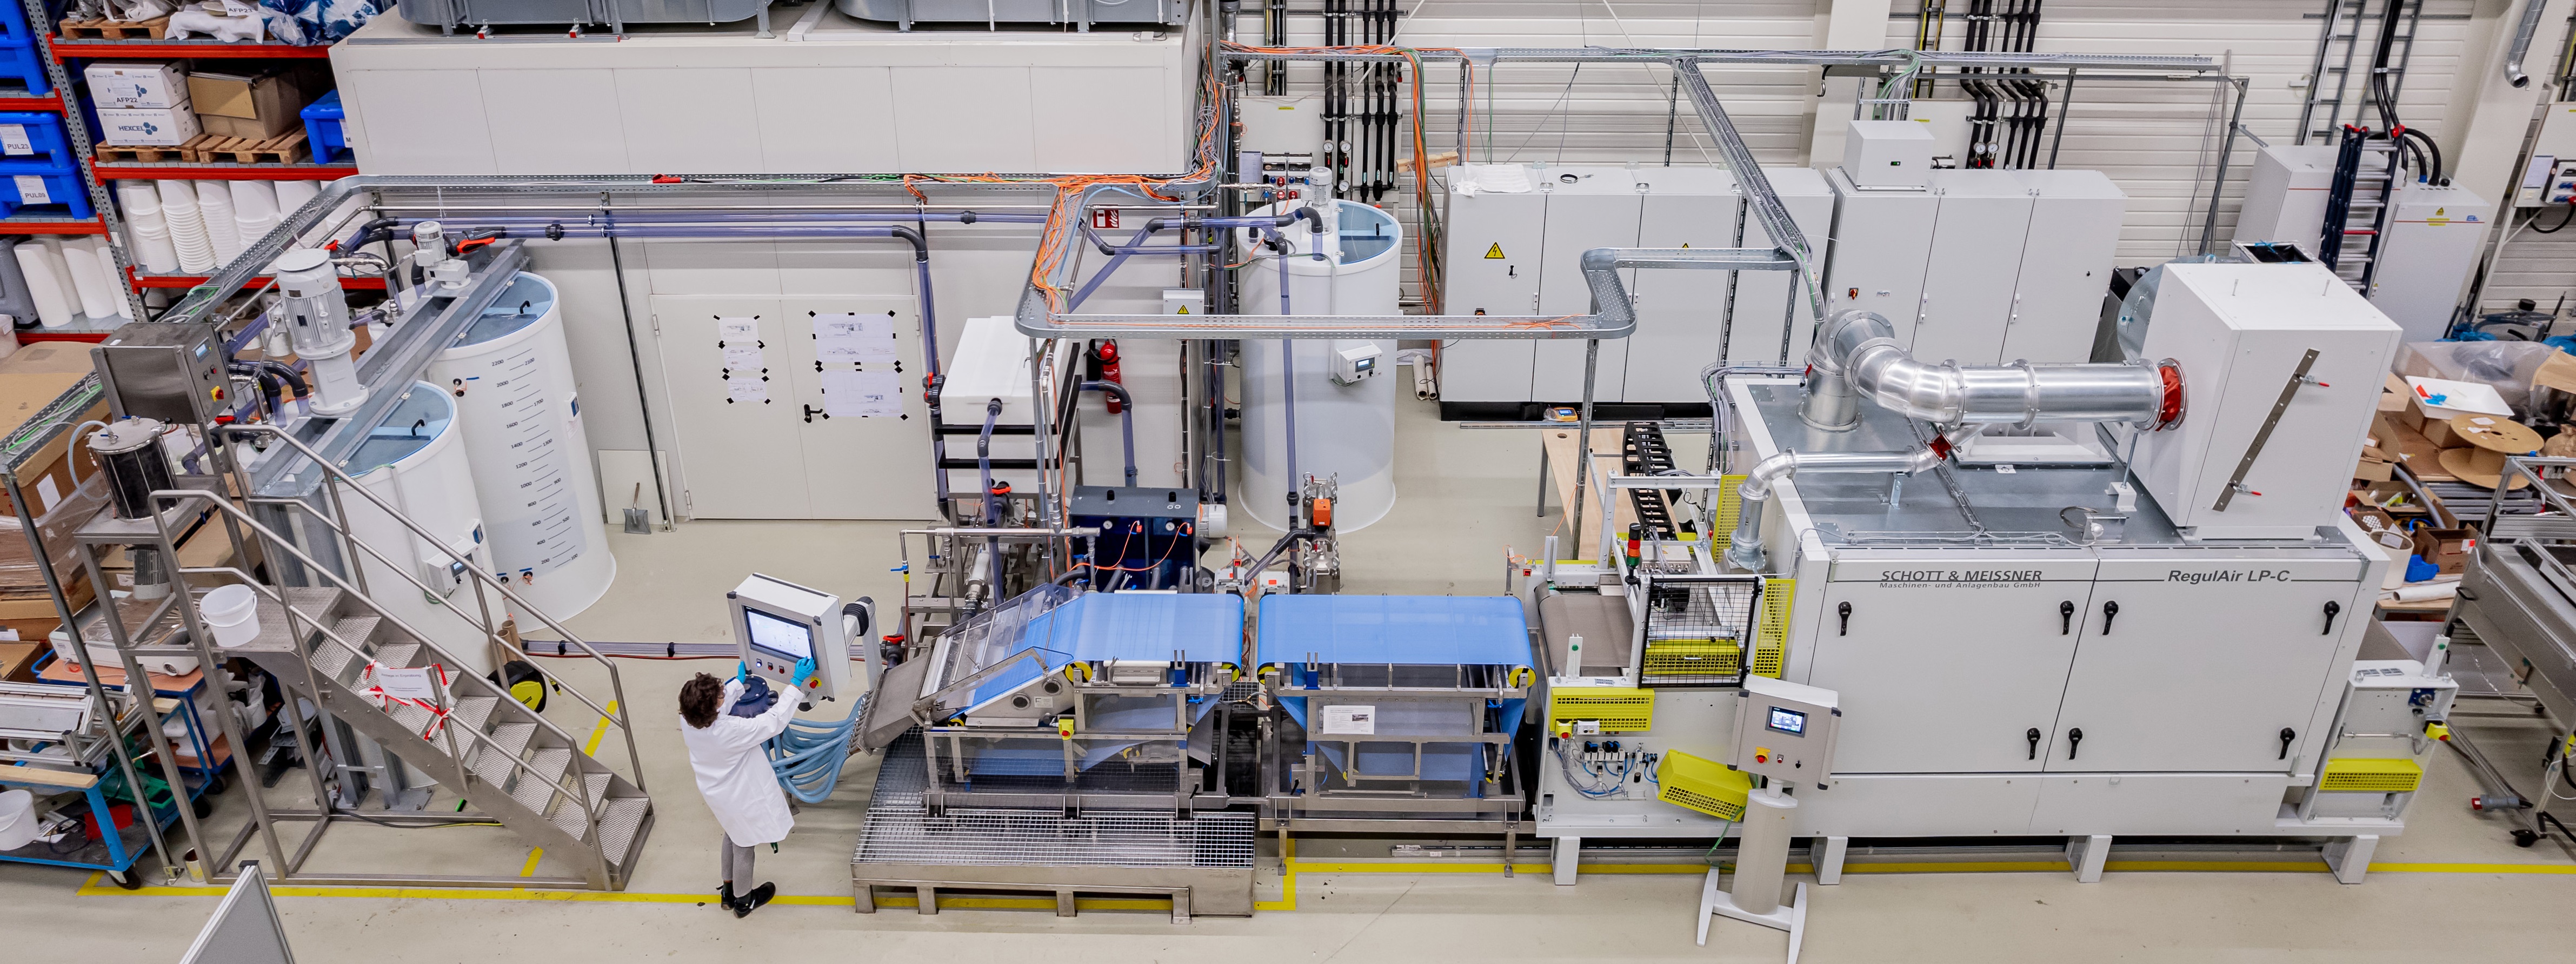 Wet nonwoven pilot plant from above